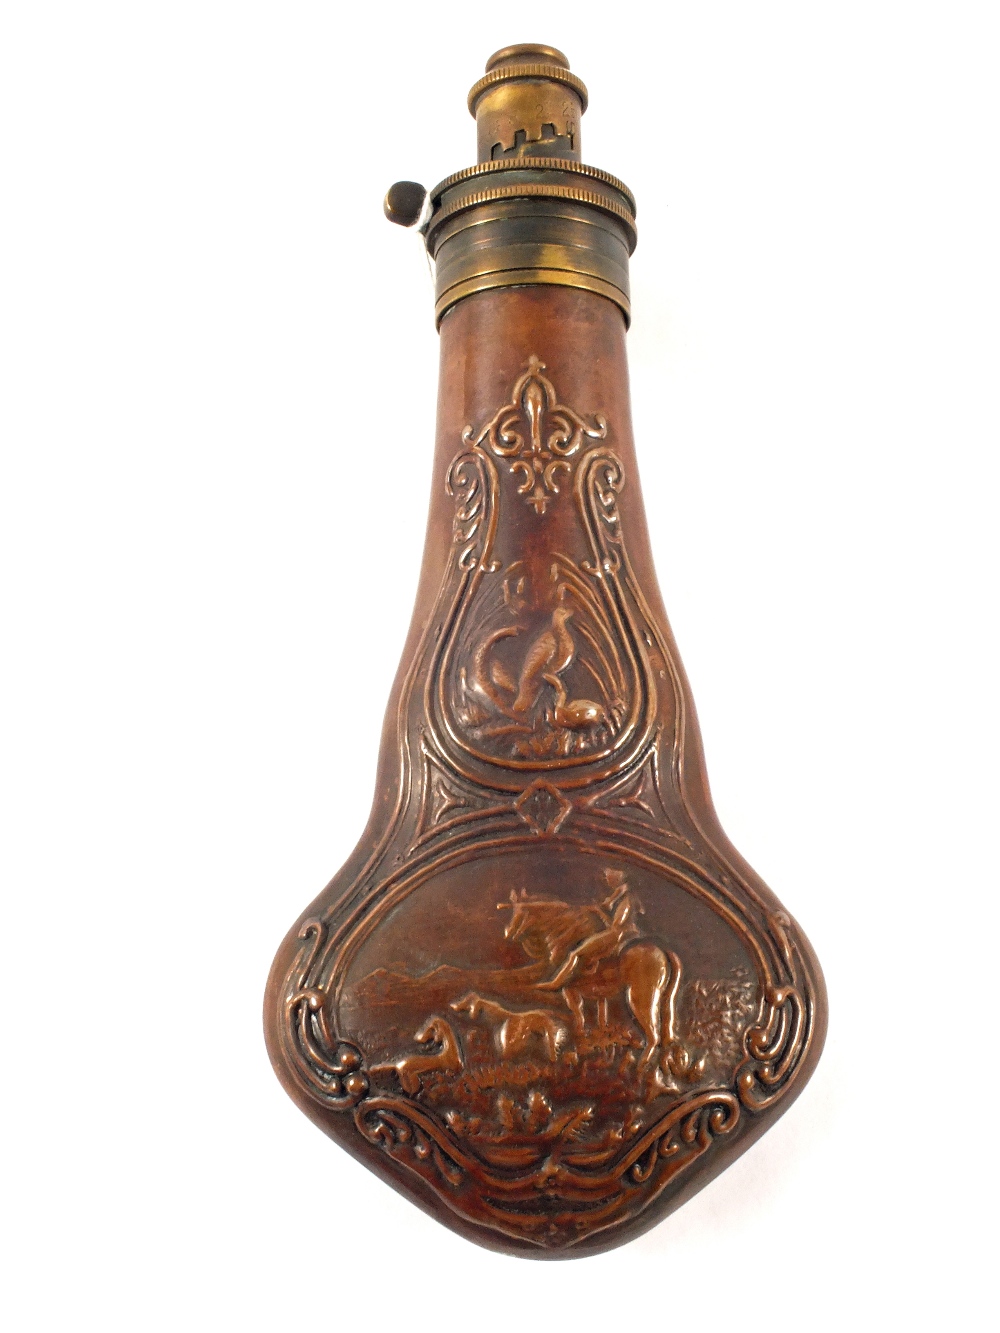 A mid 19th Century powder flask marked Sykes with embossed game birds and hunting scene